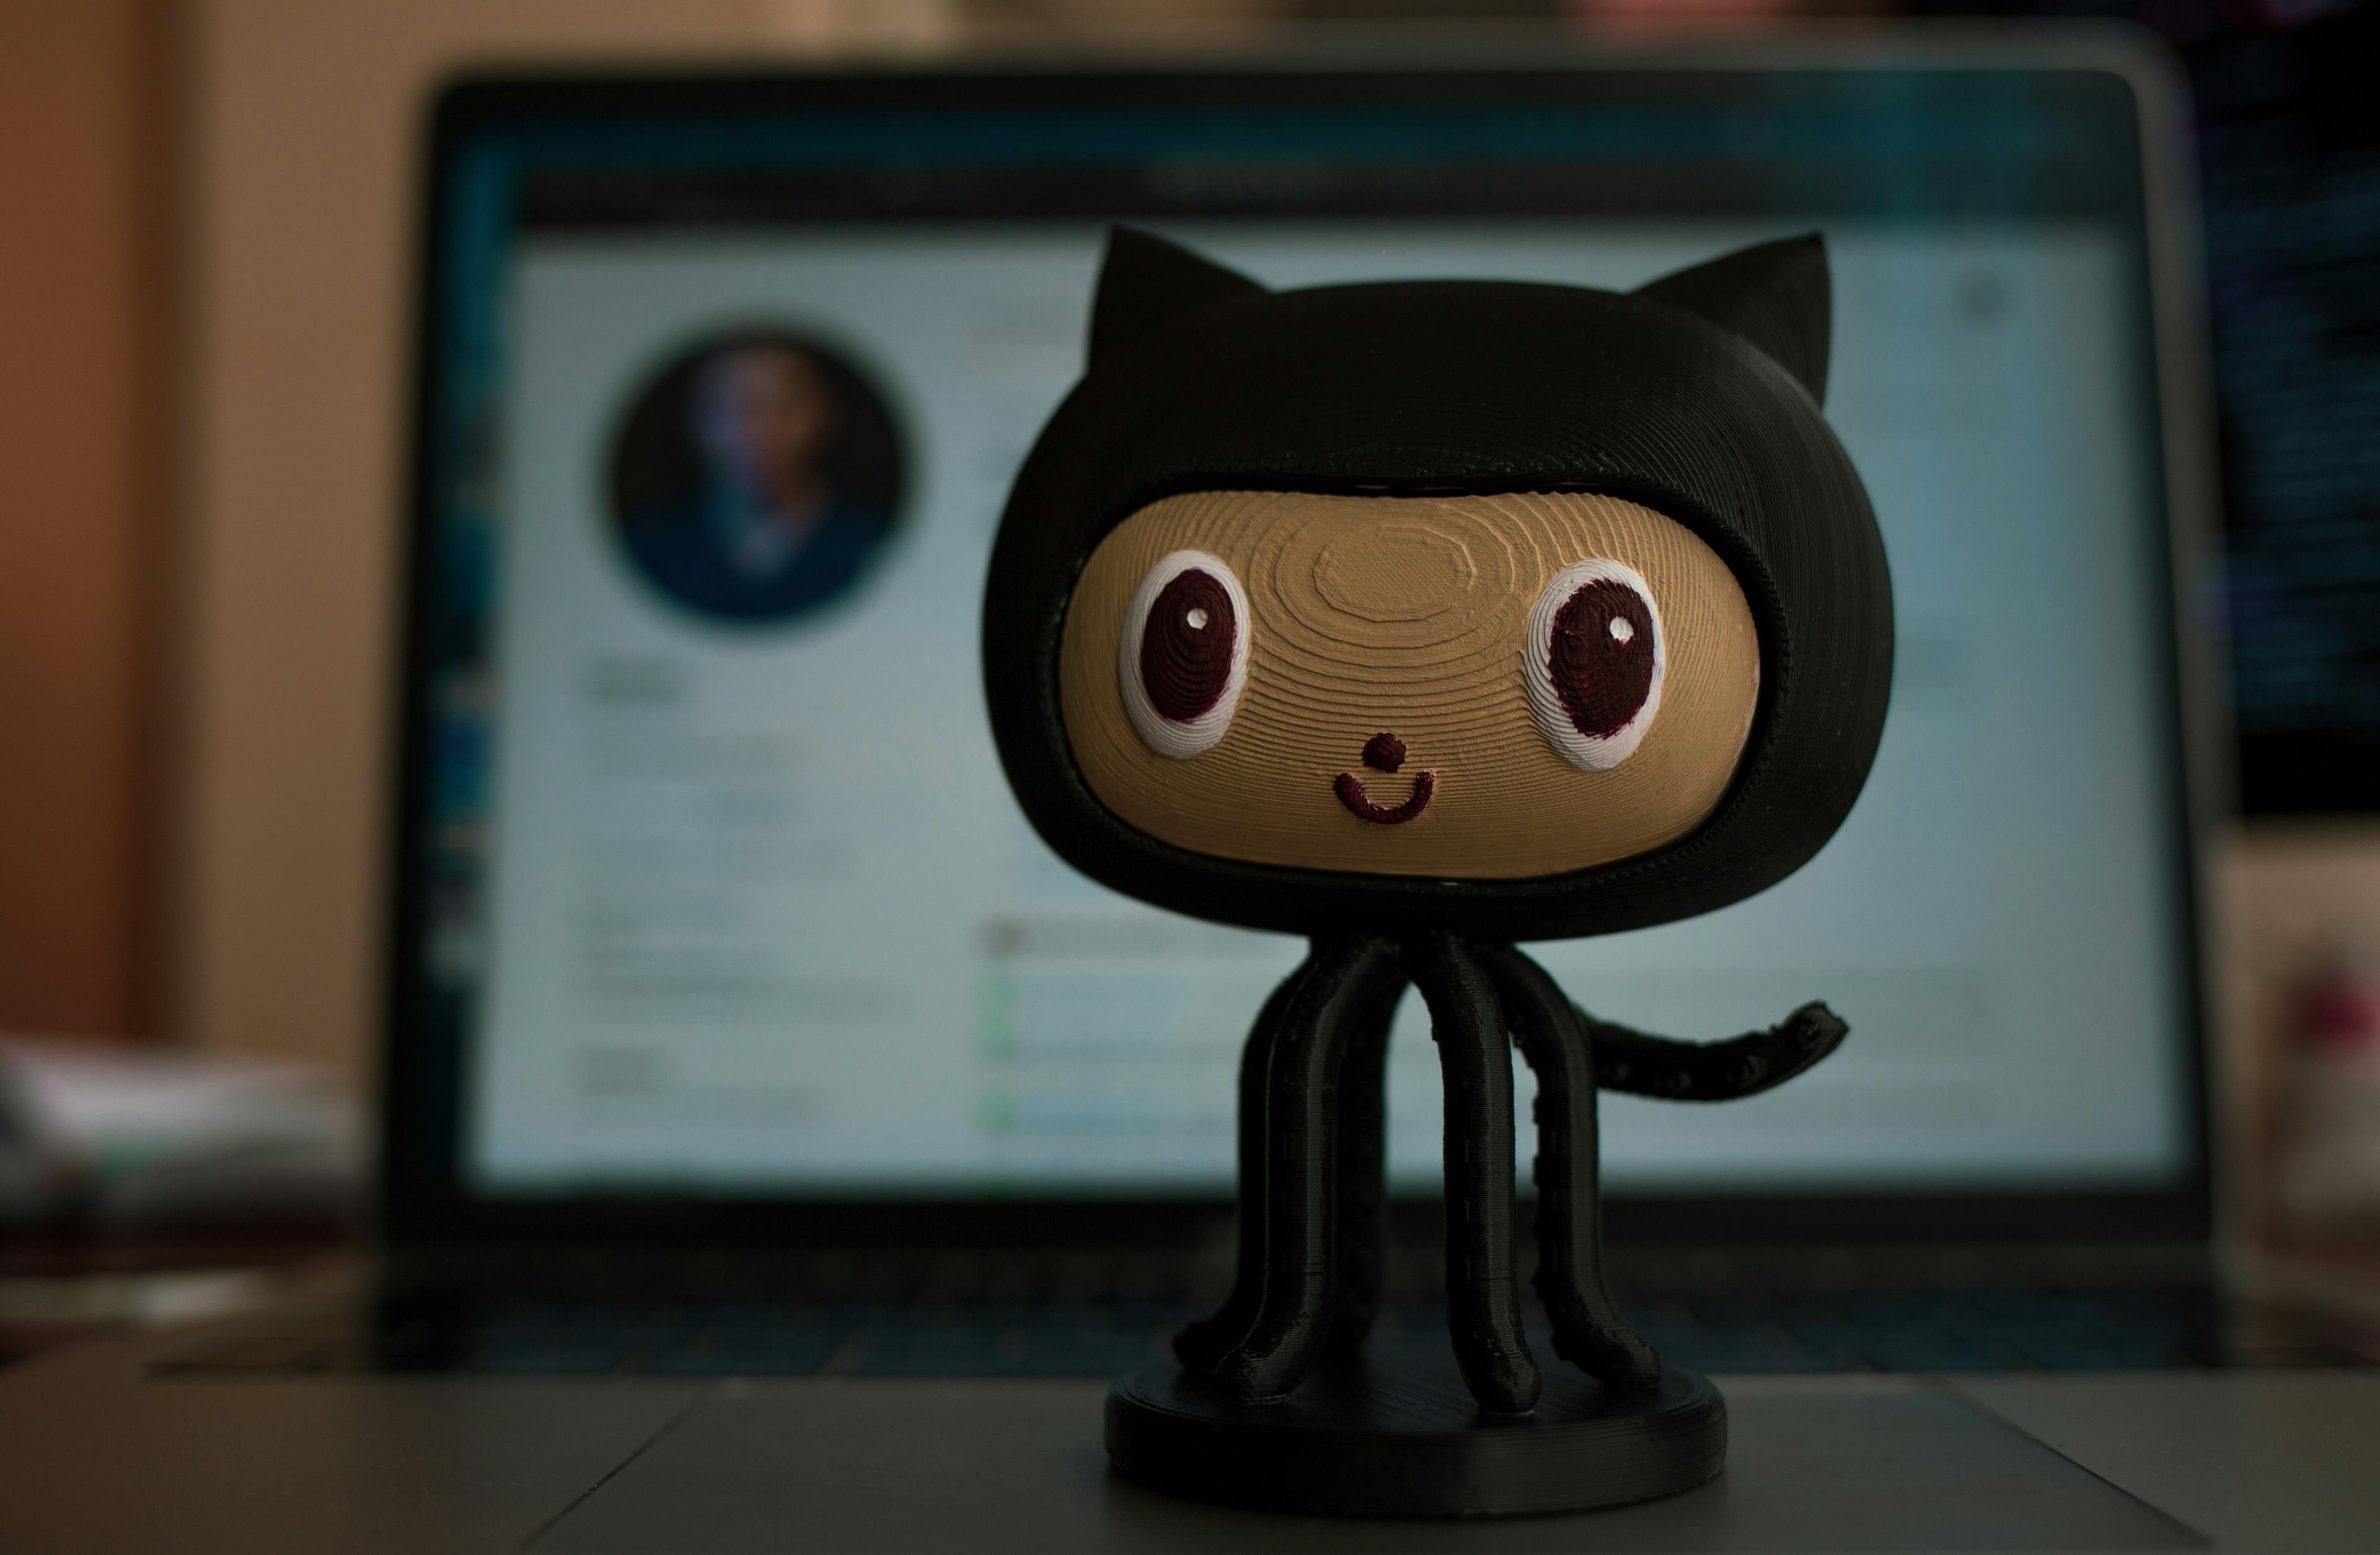 Use Github Pages to host your website for free